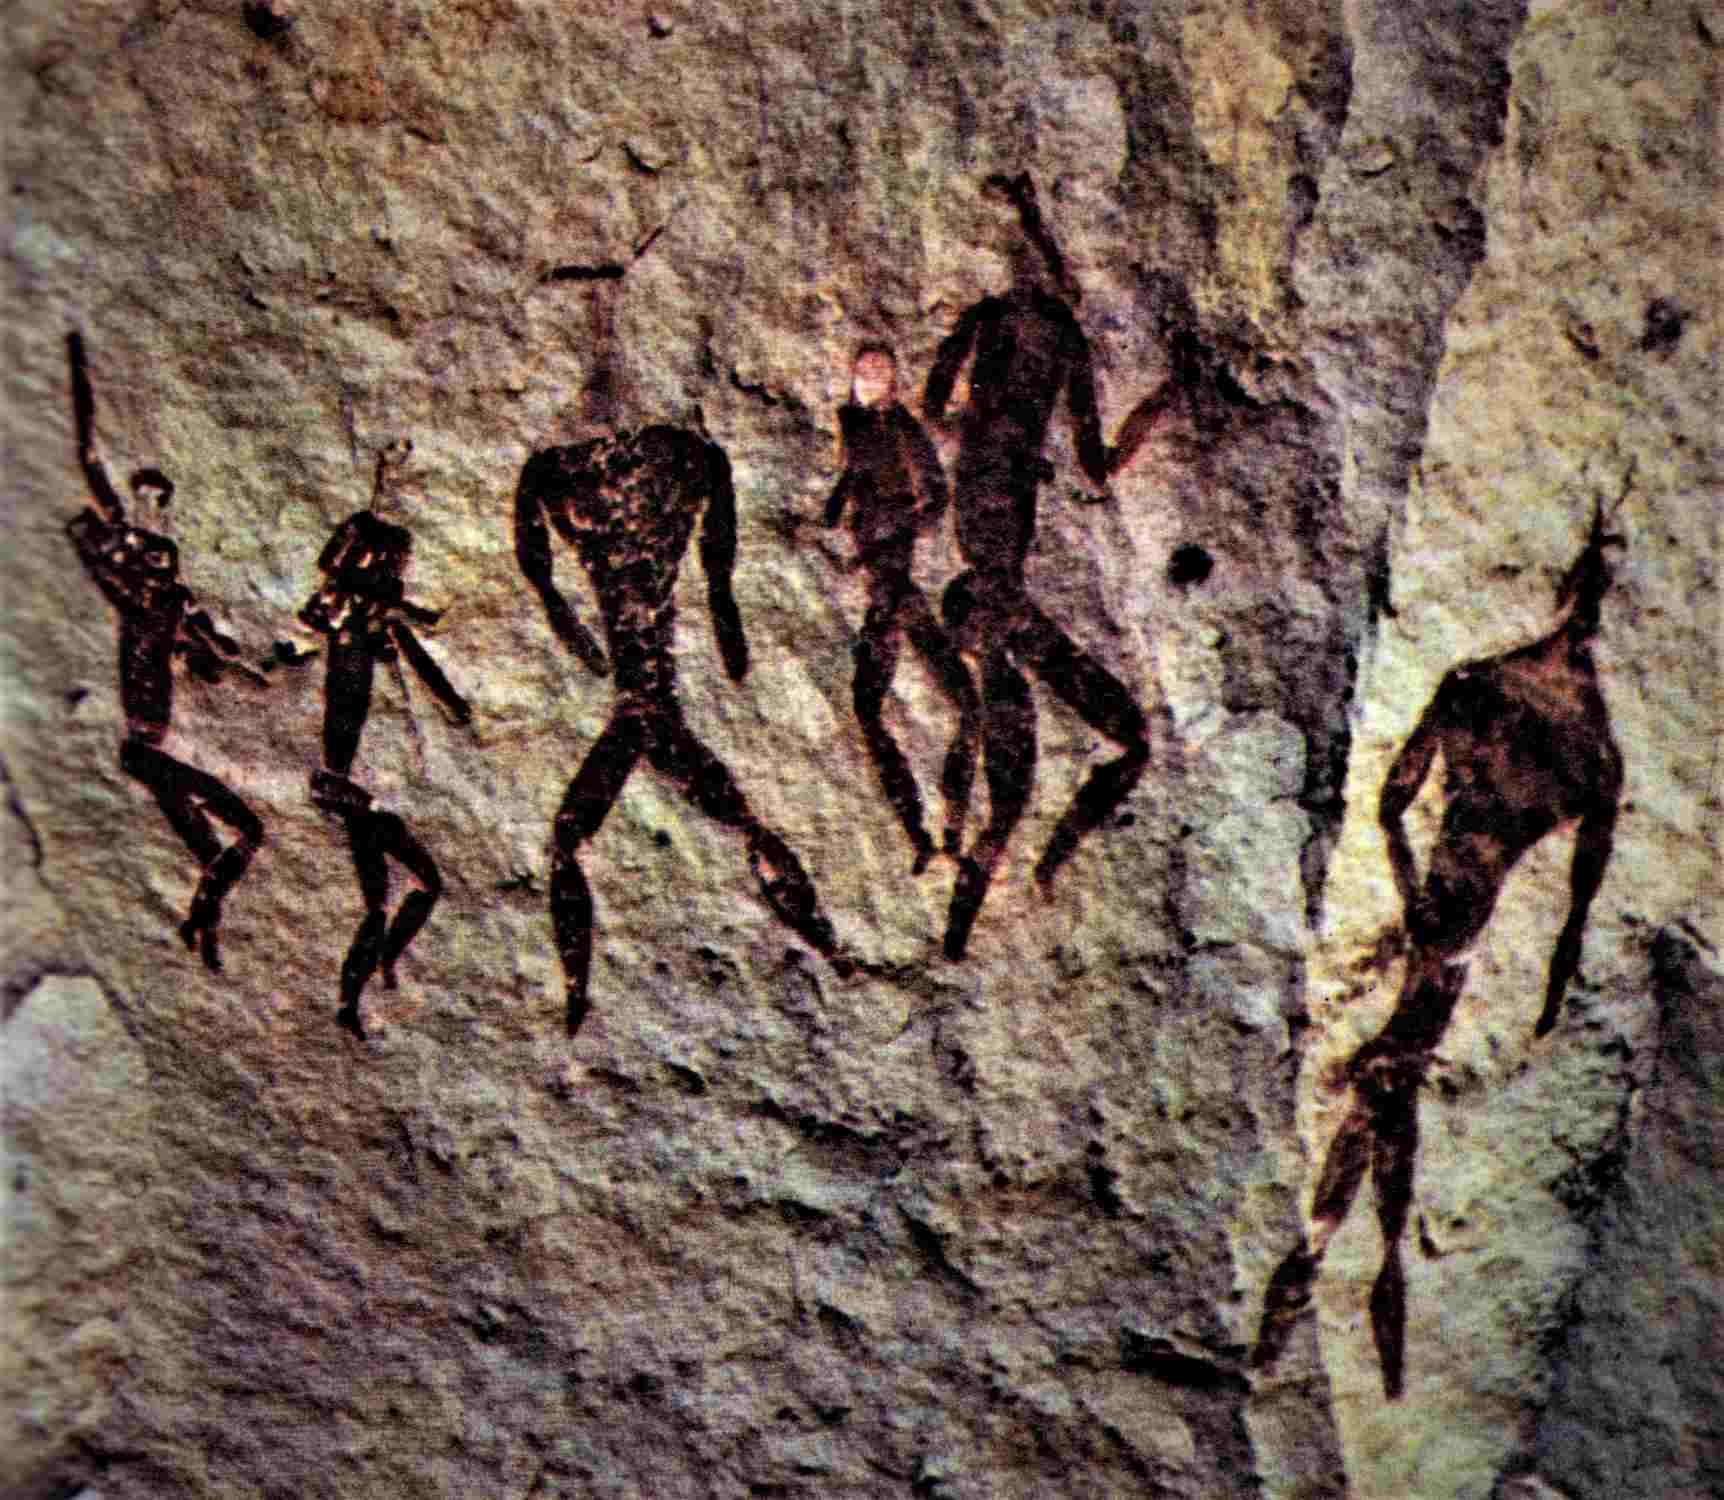 painting in the Tabamyama Rock Shelter in the Drakensberg Mountains of South Africa graphically illustrates the "Igigi Rebellion". The three Beings with there backs to us are the "Igigi" -- the Anunnaki, second from the left can be identified by the "Hand Bag" on his right arm. This painting appears to suggest a "Conflict Situation".